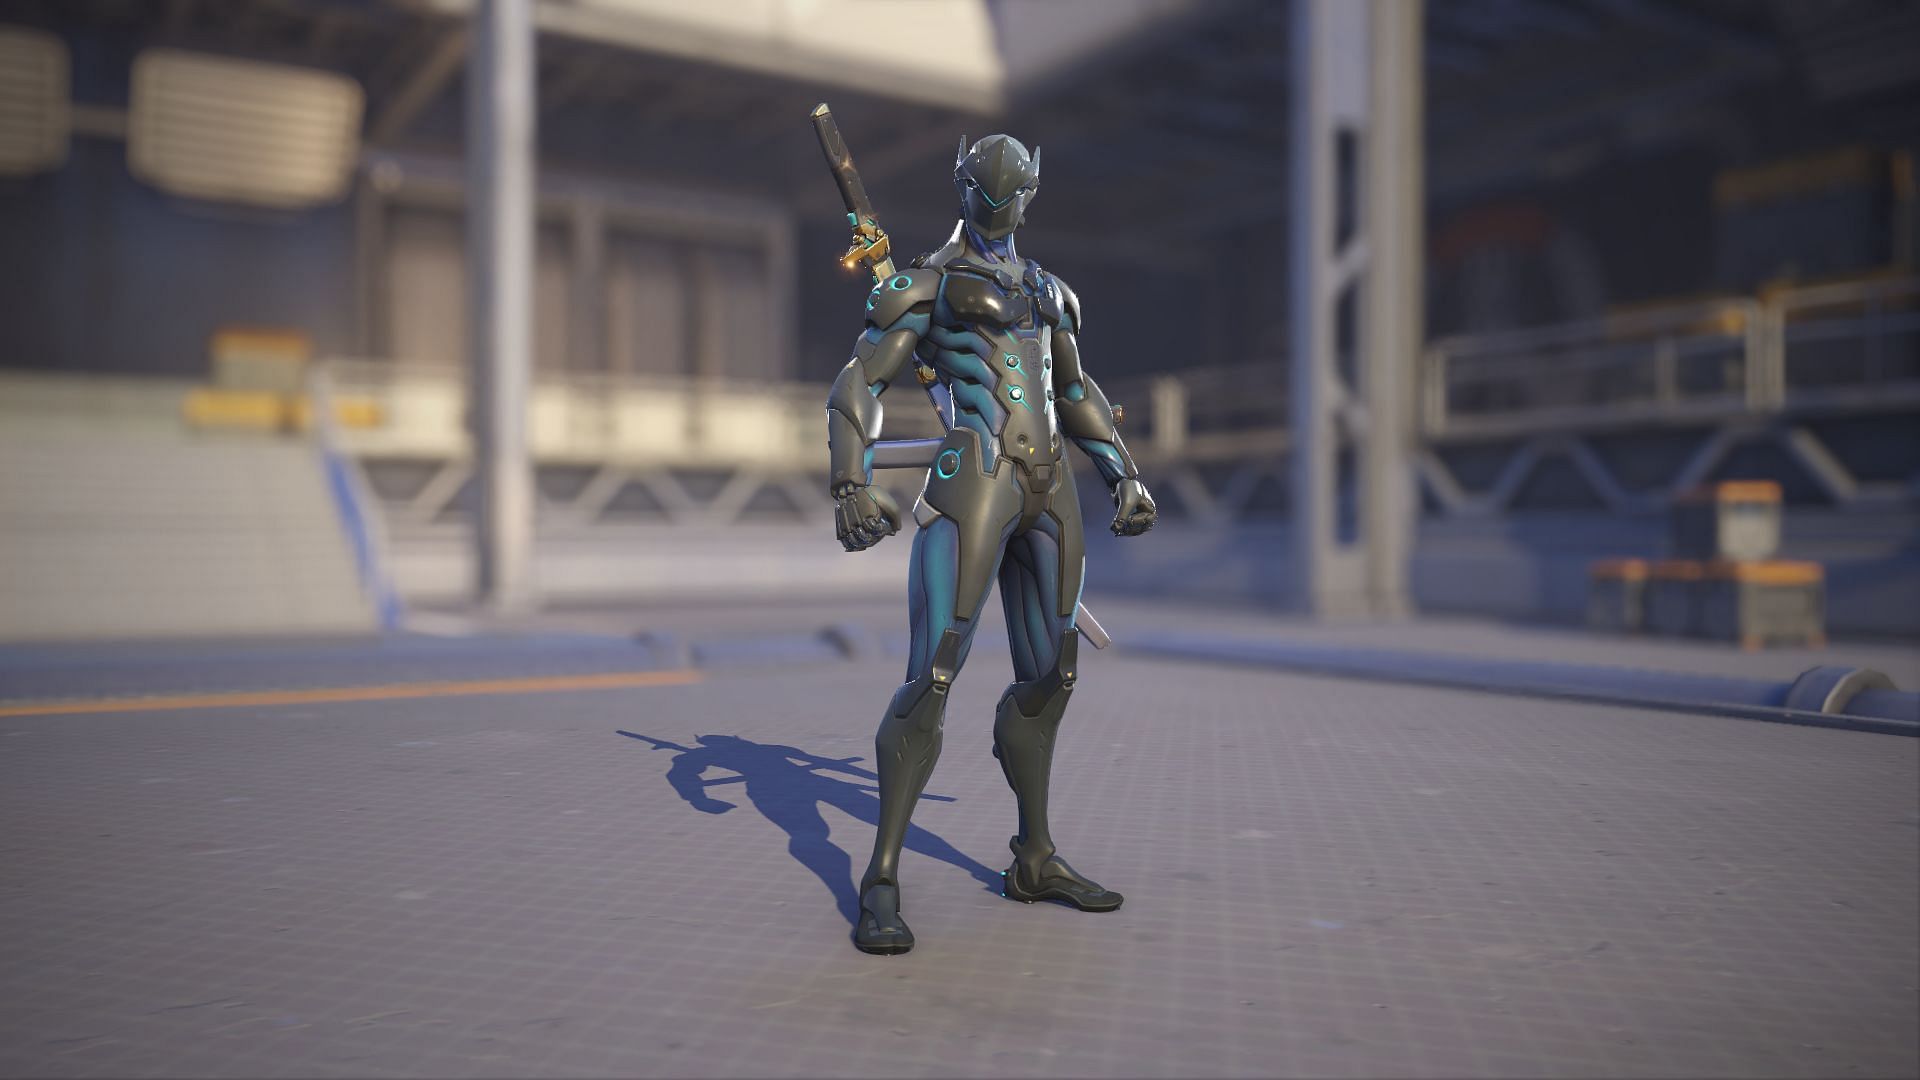 Carbon Fiber skin as seen in Overwatch 2 (Image via Blizzard Entertainment)